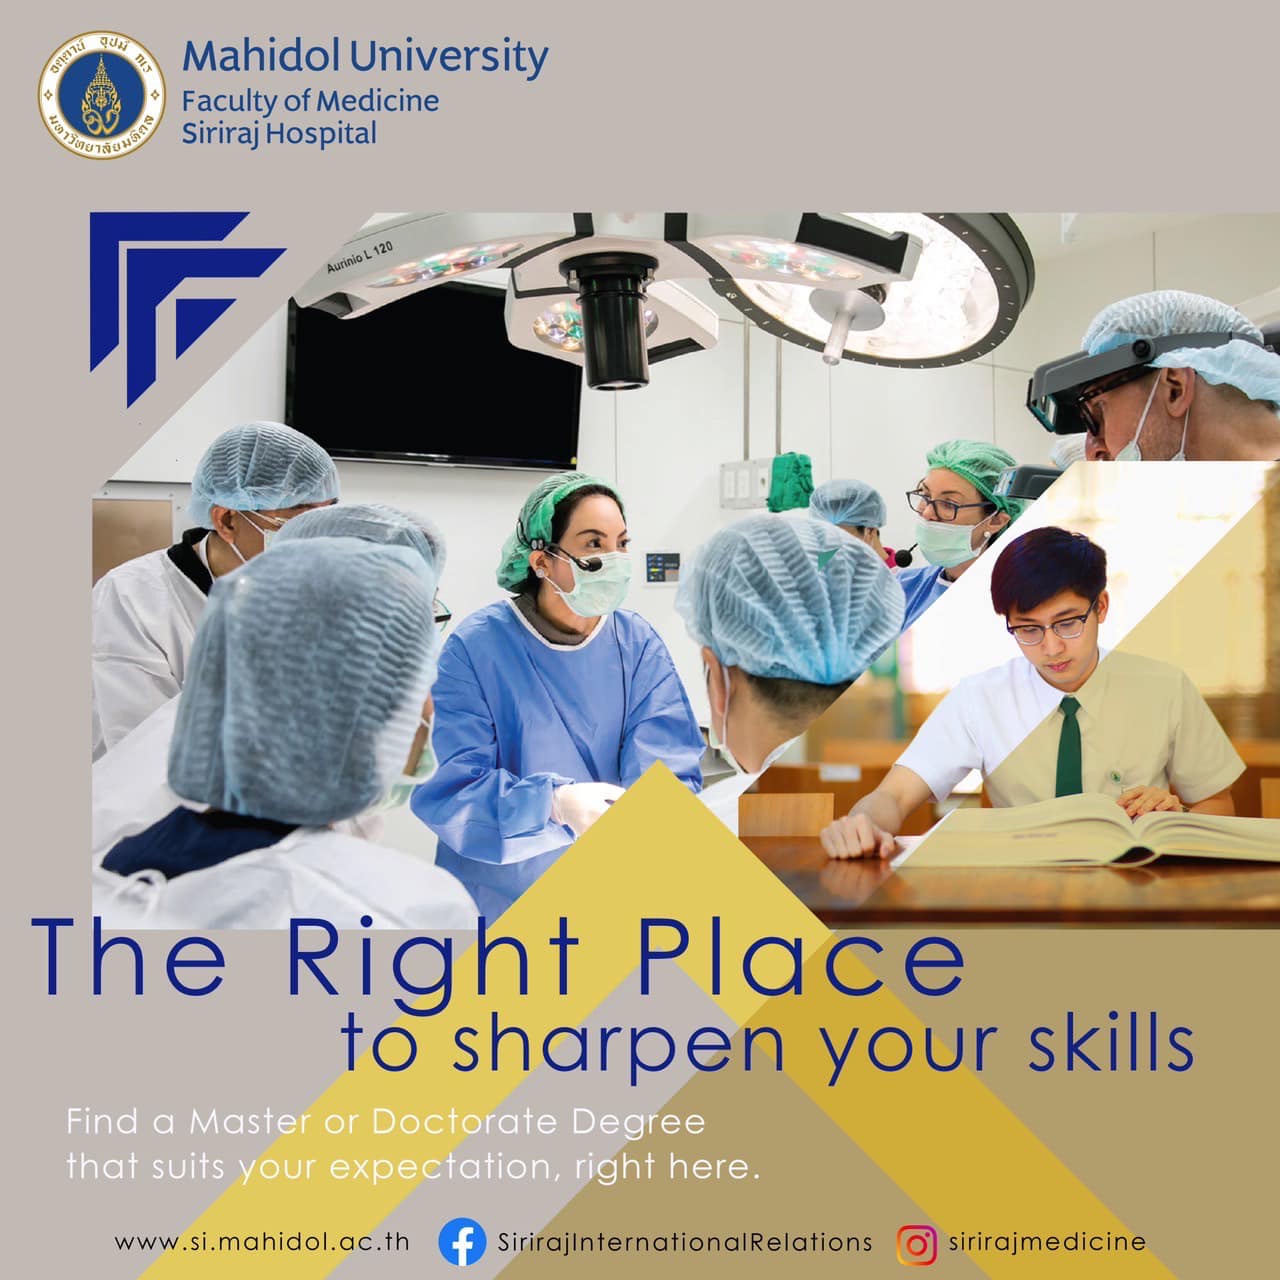 Siriraj Hospital – The right place to sharpen your skills